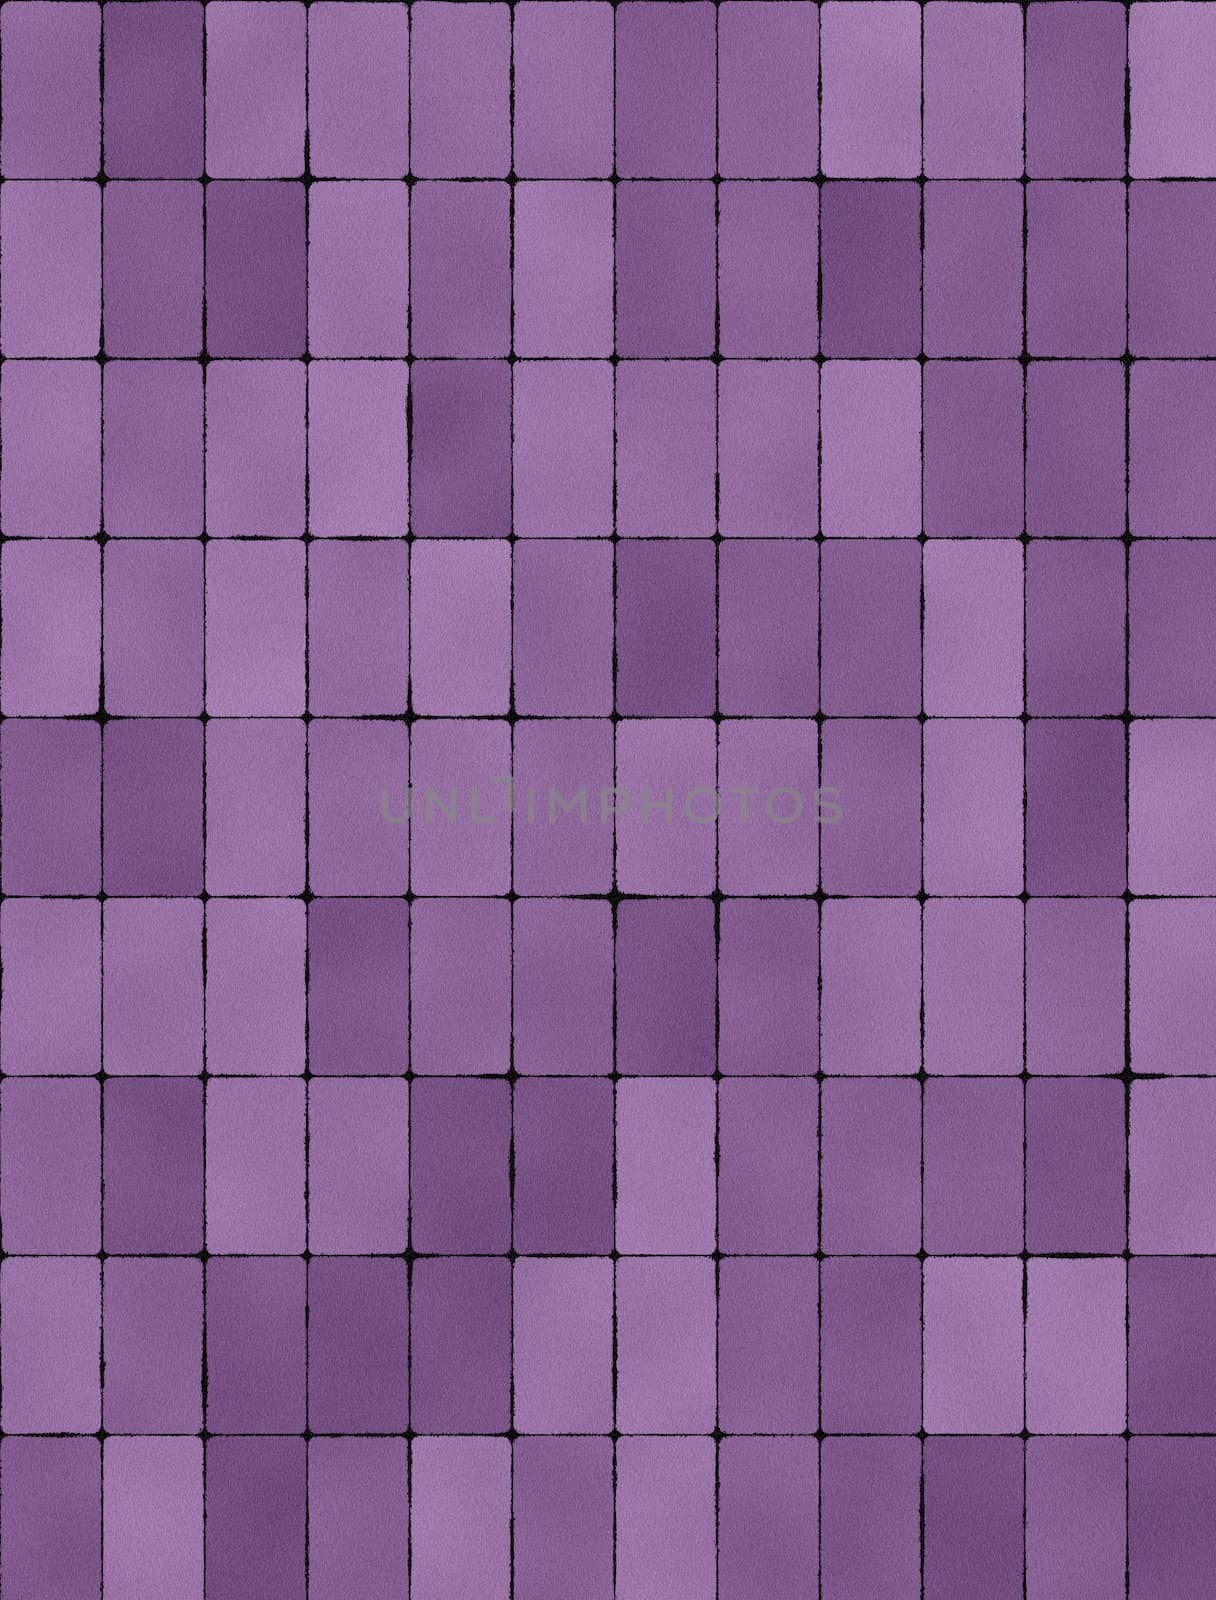 Seamless texture of purple tiles by sfinks